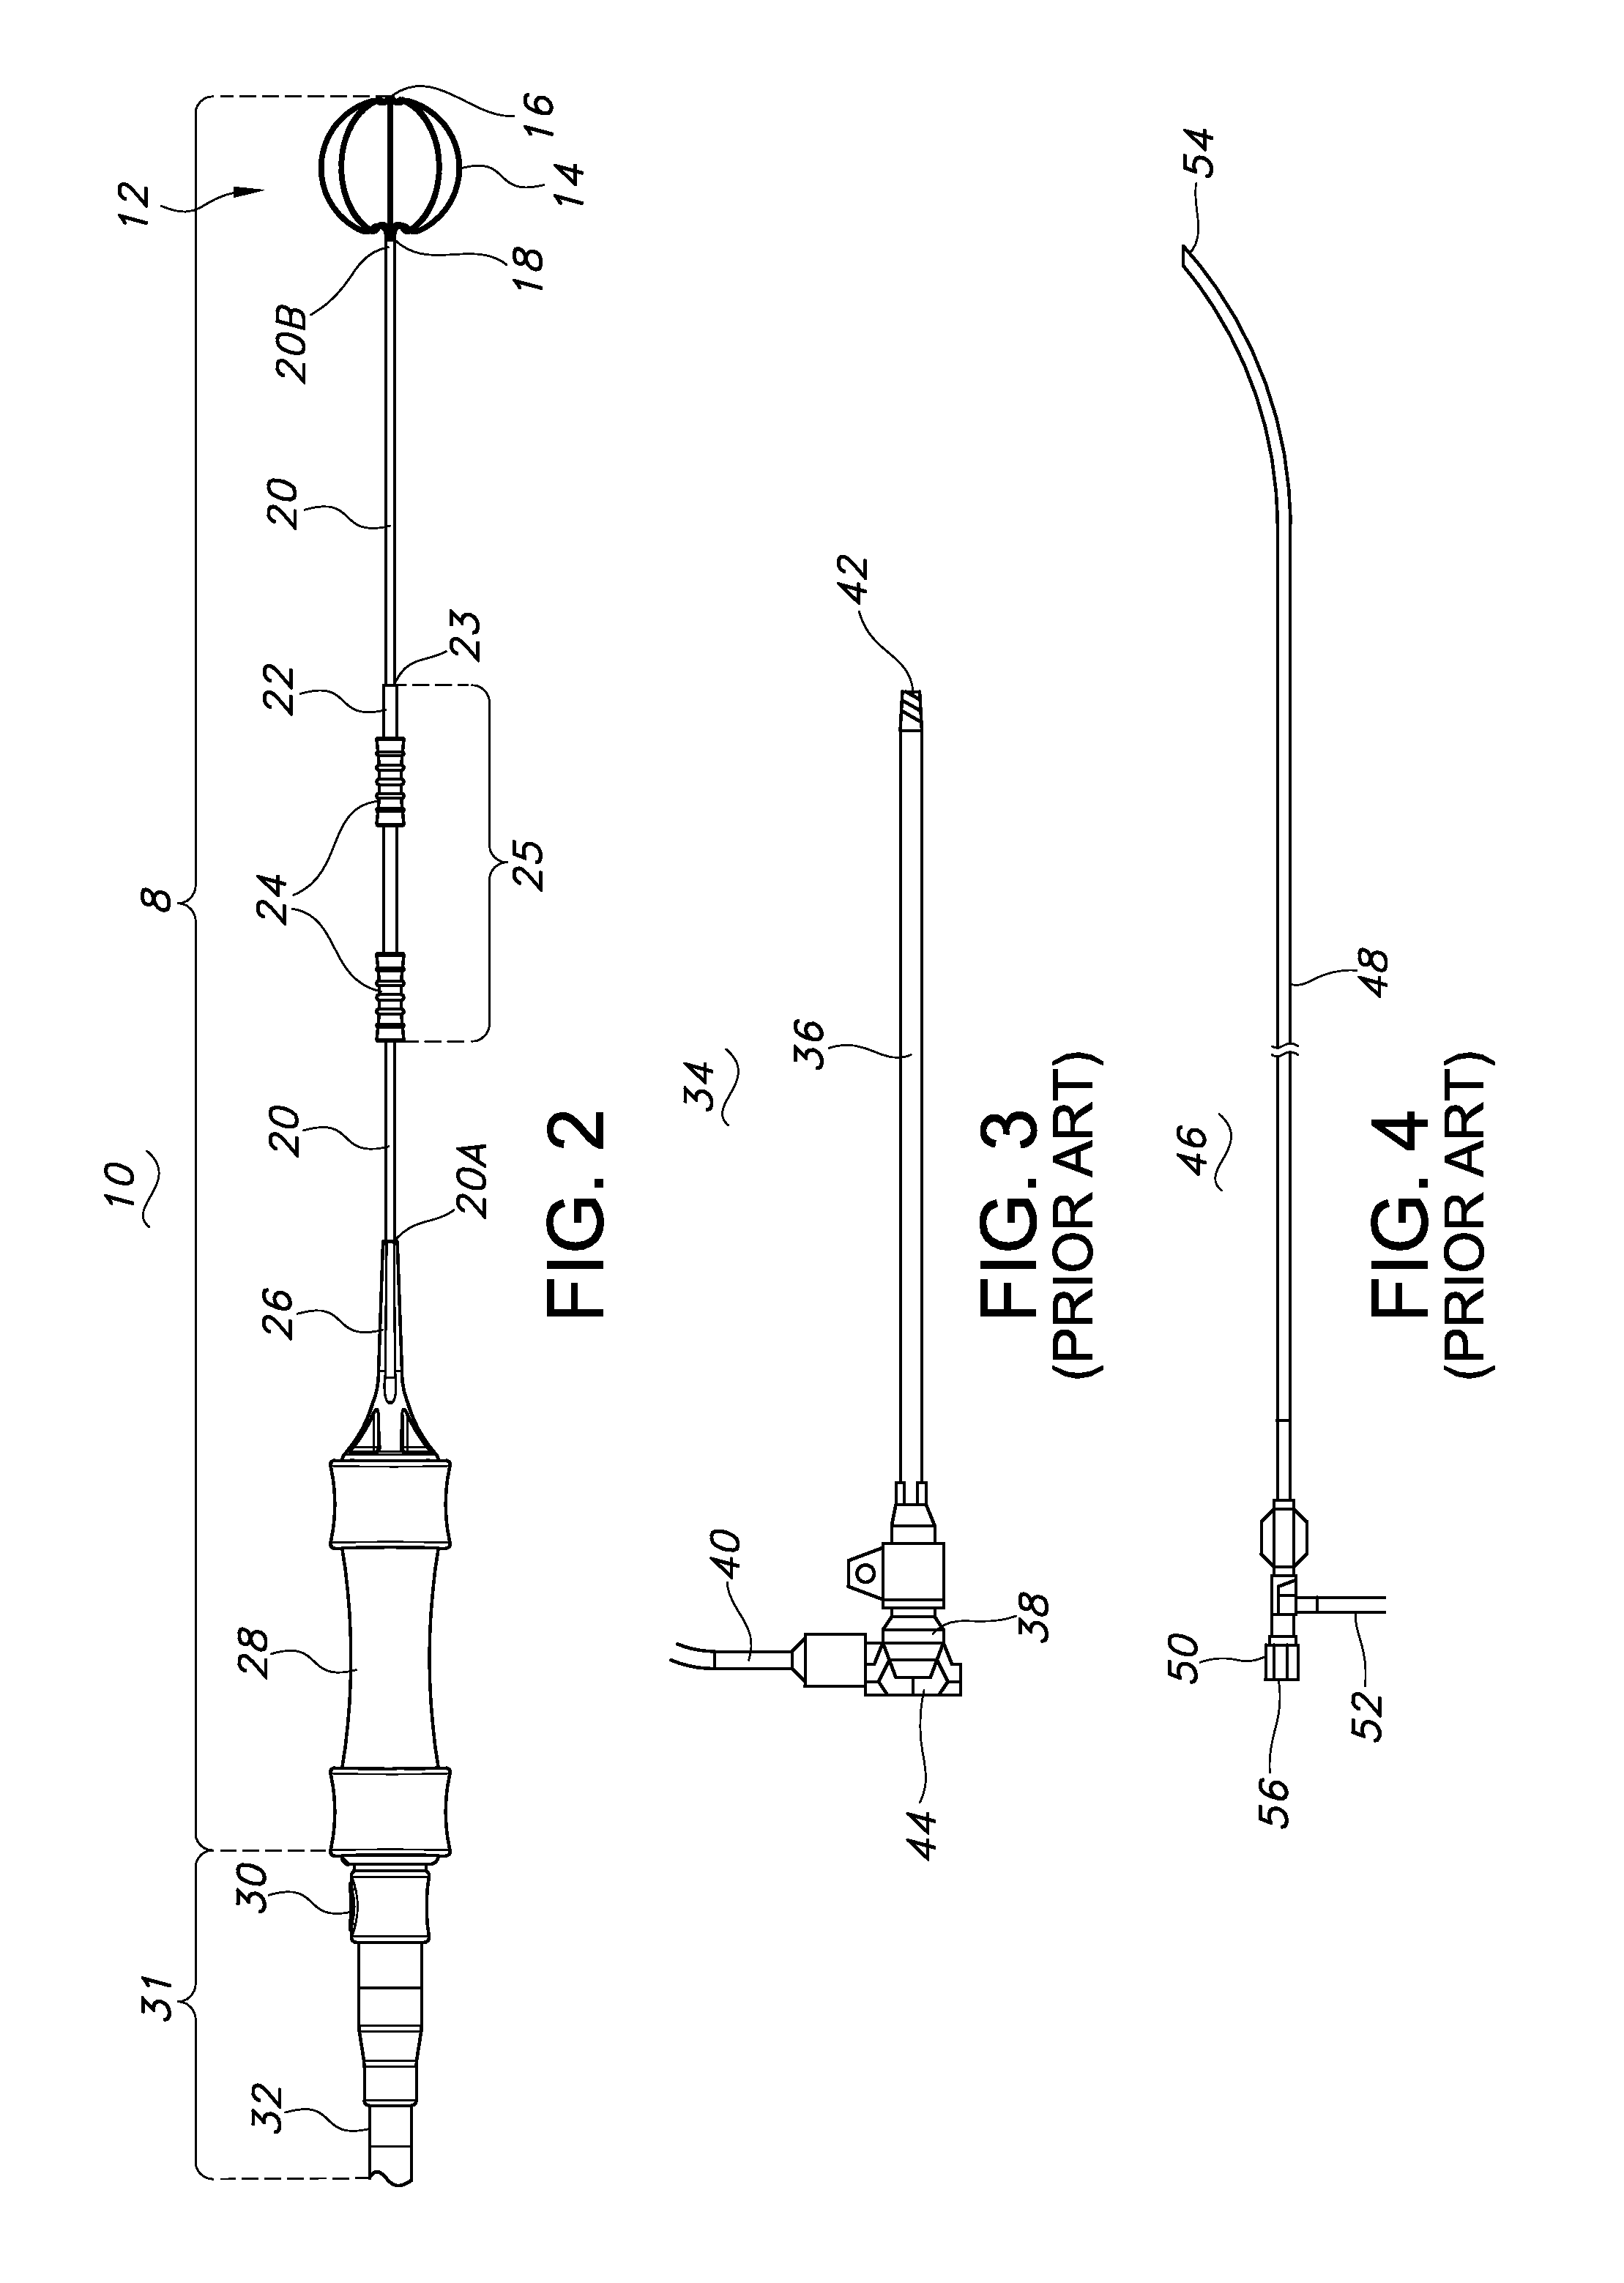 Flexible electrode assembly for insertion into body lumen or organ